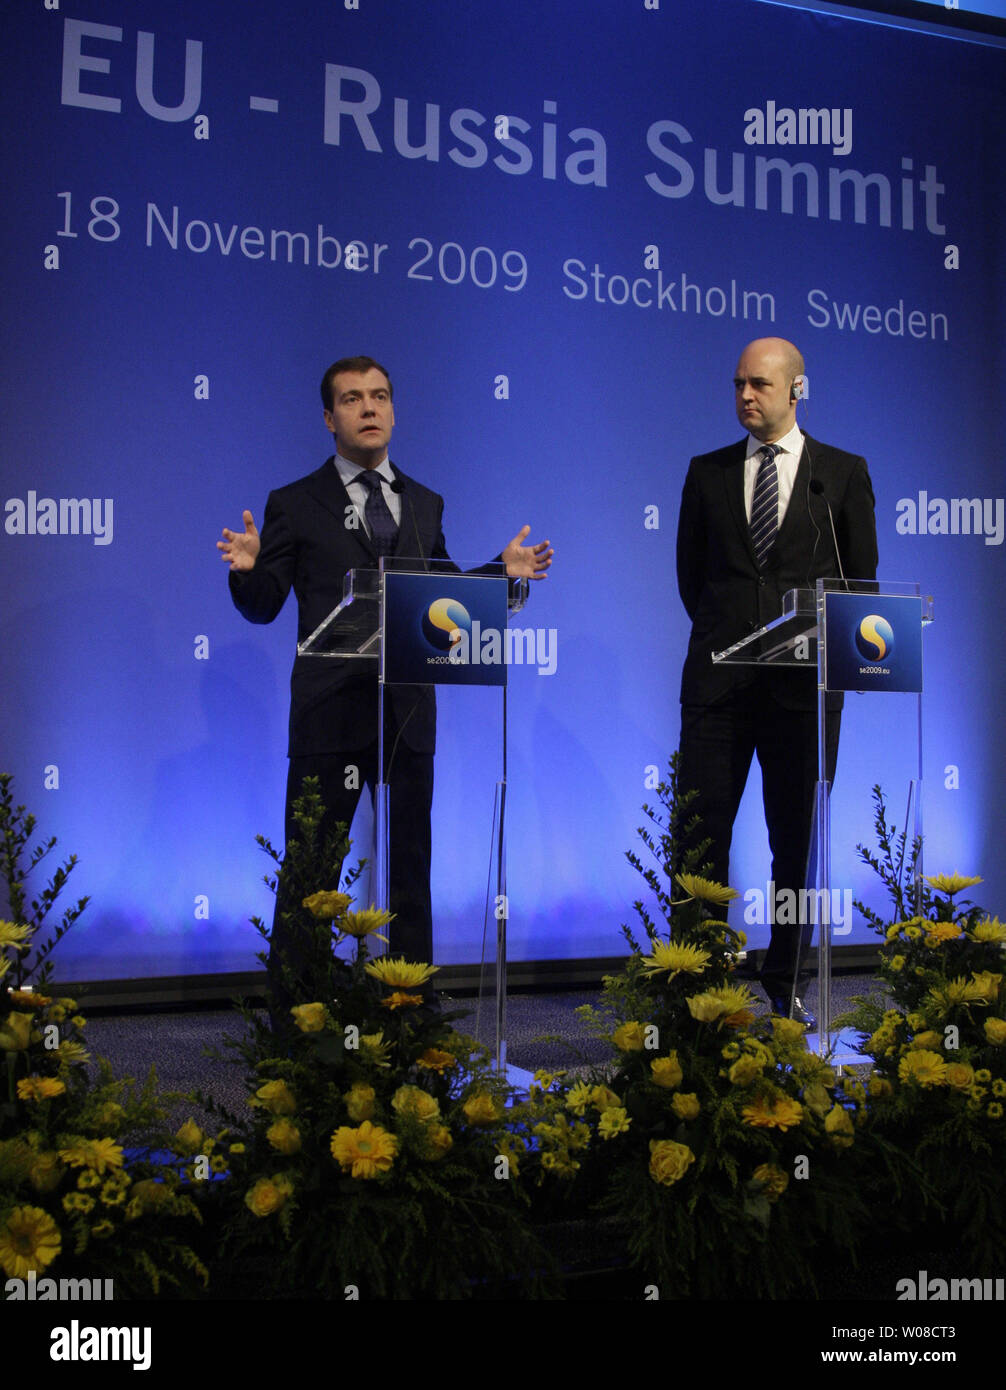 Russian President Dmitry Medvedev (L) speaks next to Swedish Prime Minister Fredrick Reinfeldt at a news conference after a one-day EU-Russia summit in Stockholm on November 18, 2009. UPI/Anatoli Zhdanov Stock Photo